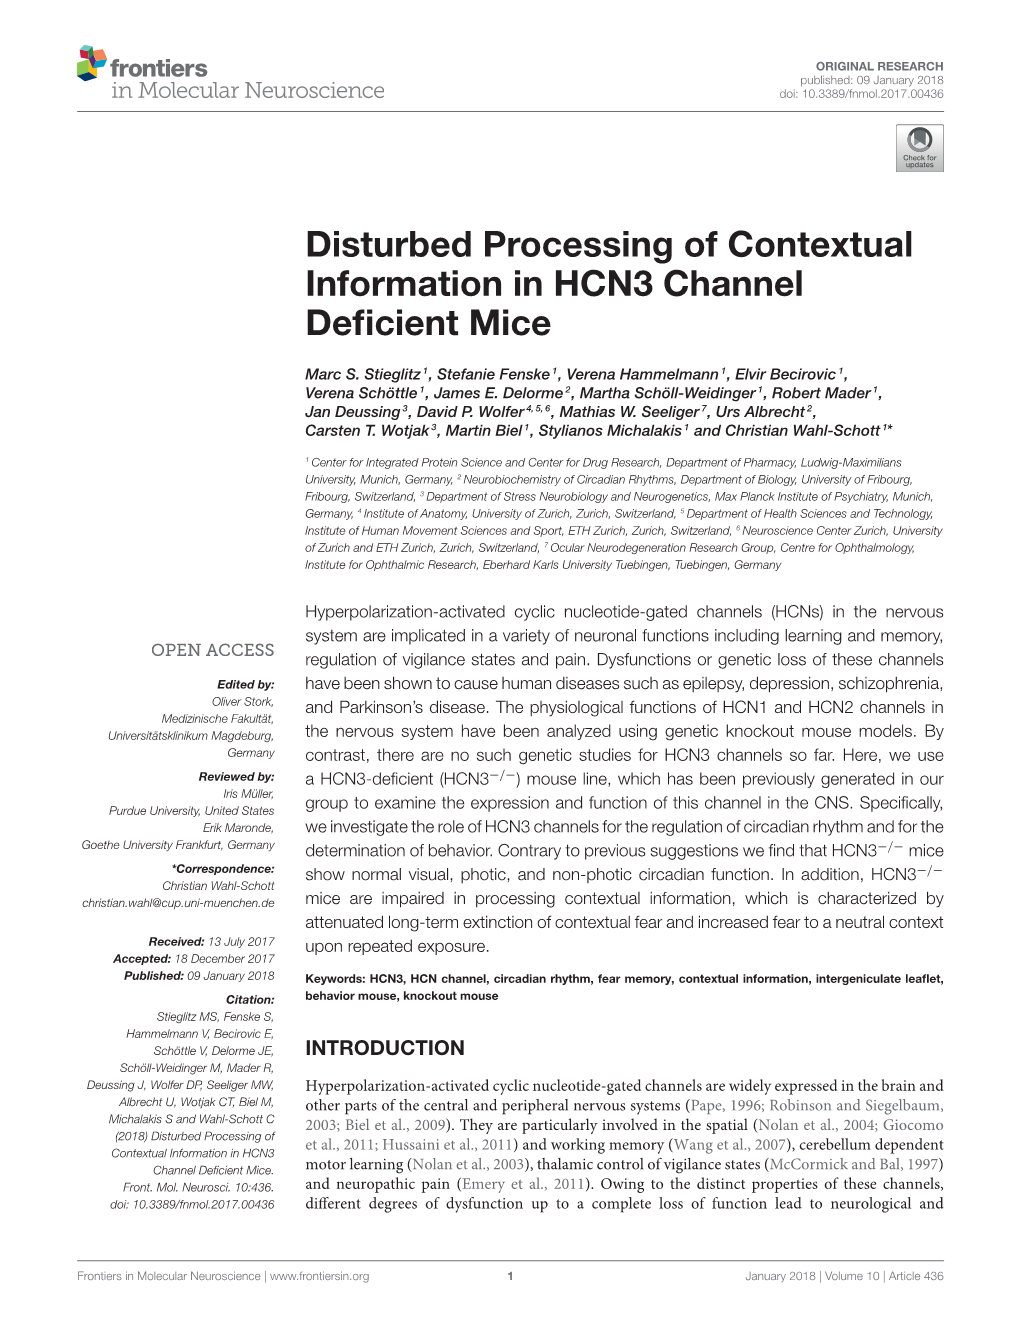 Disturbed Processing of Contextual Information in HCN3 Channel Deficient Mice